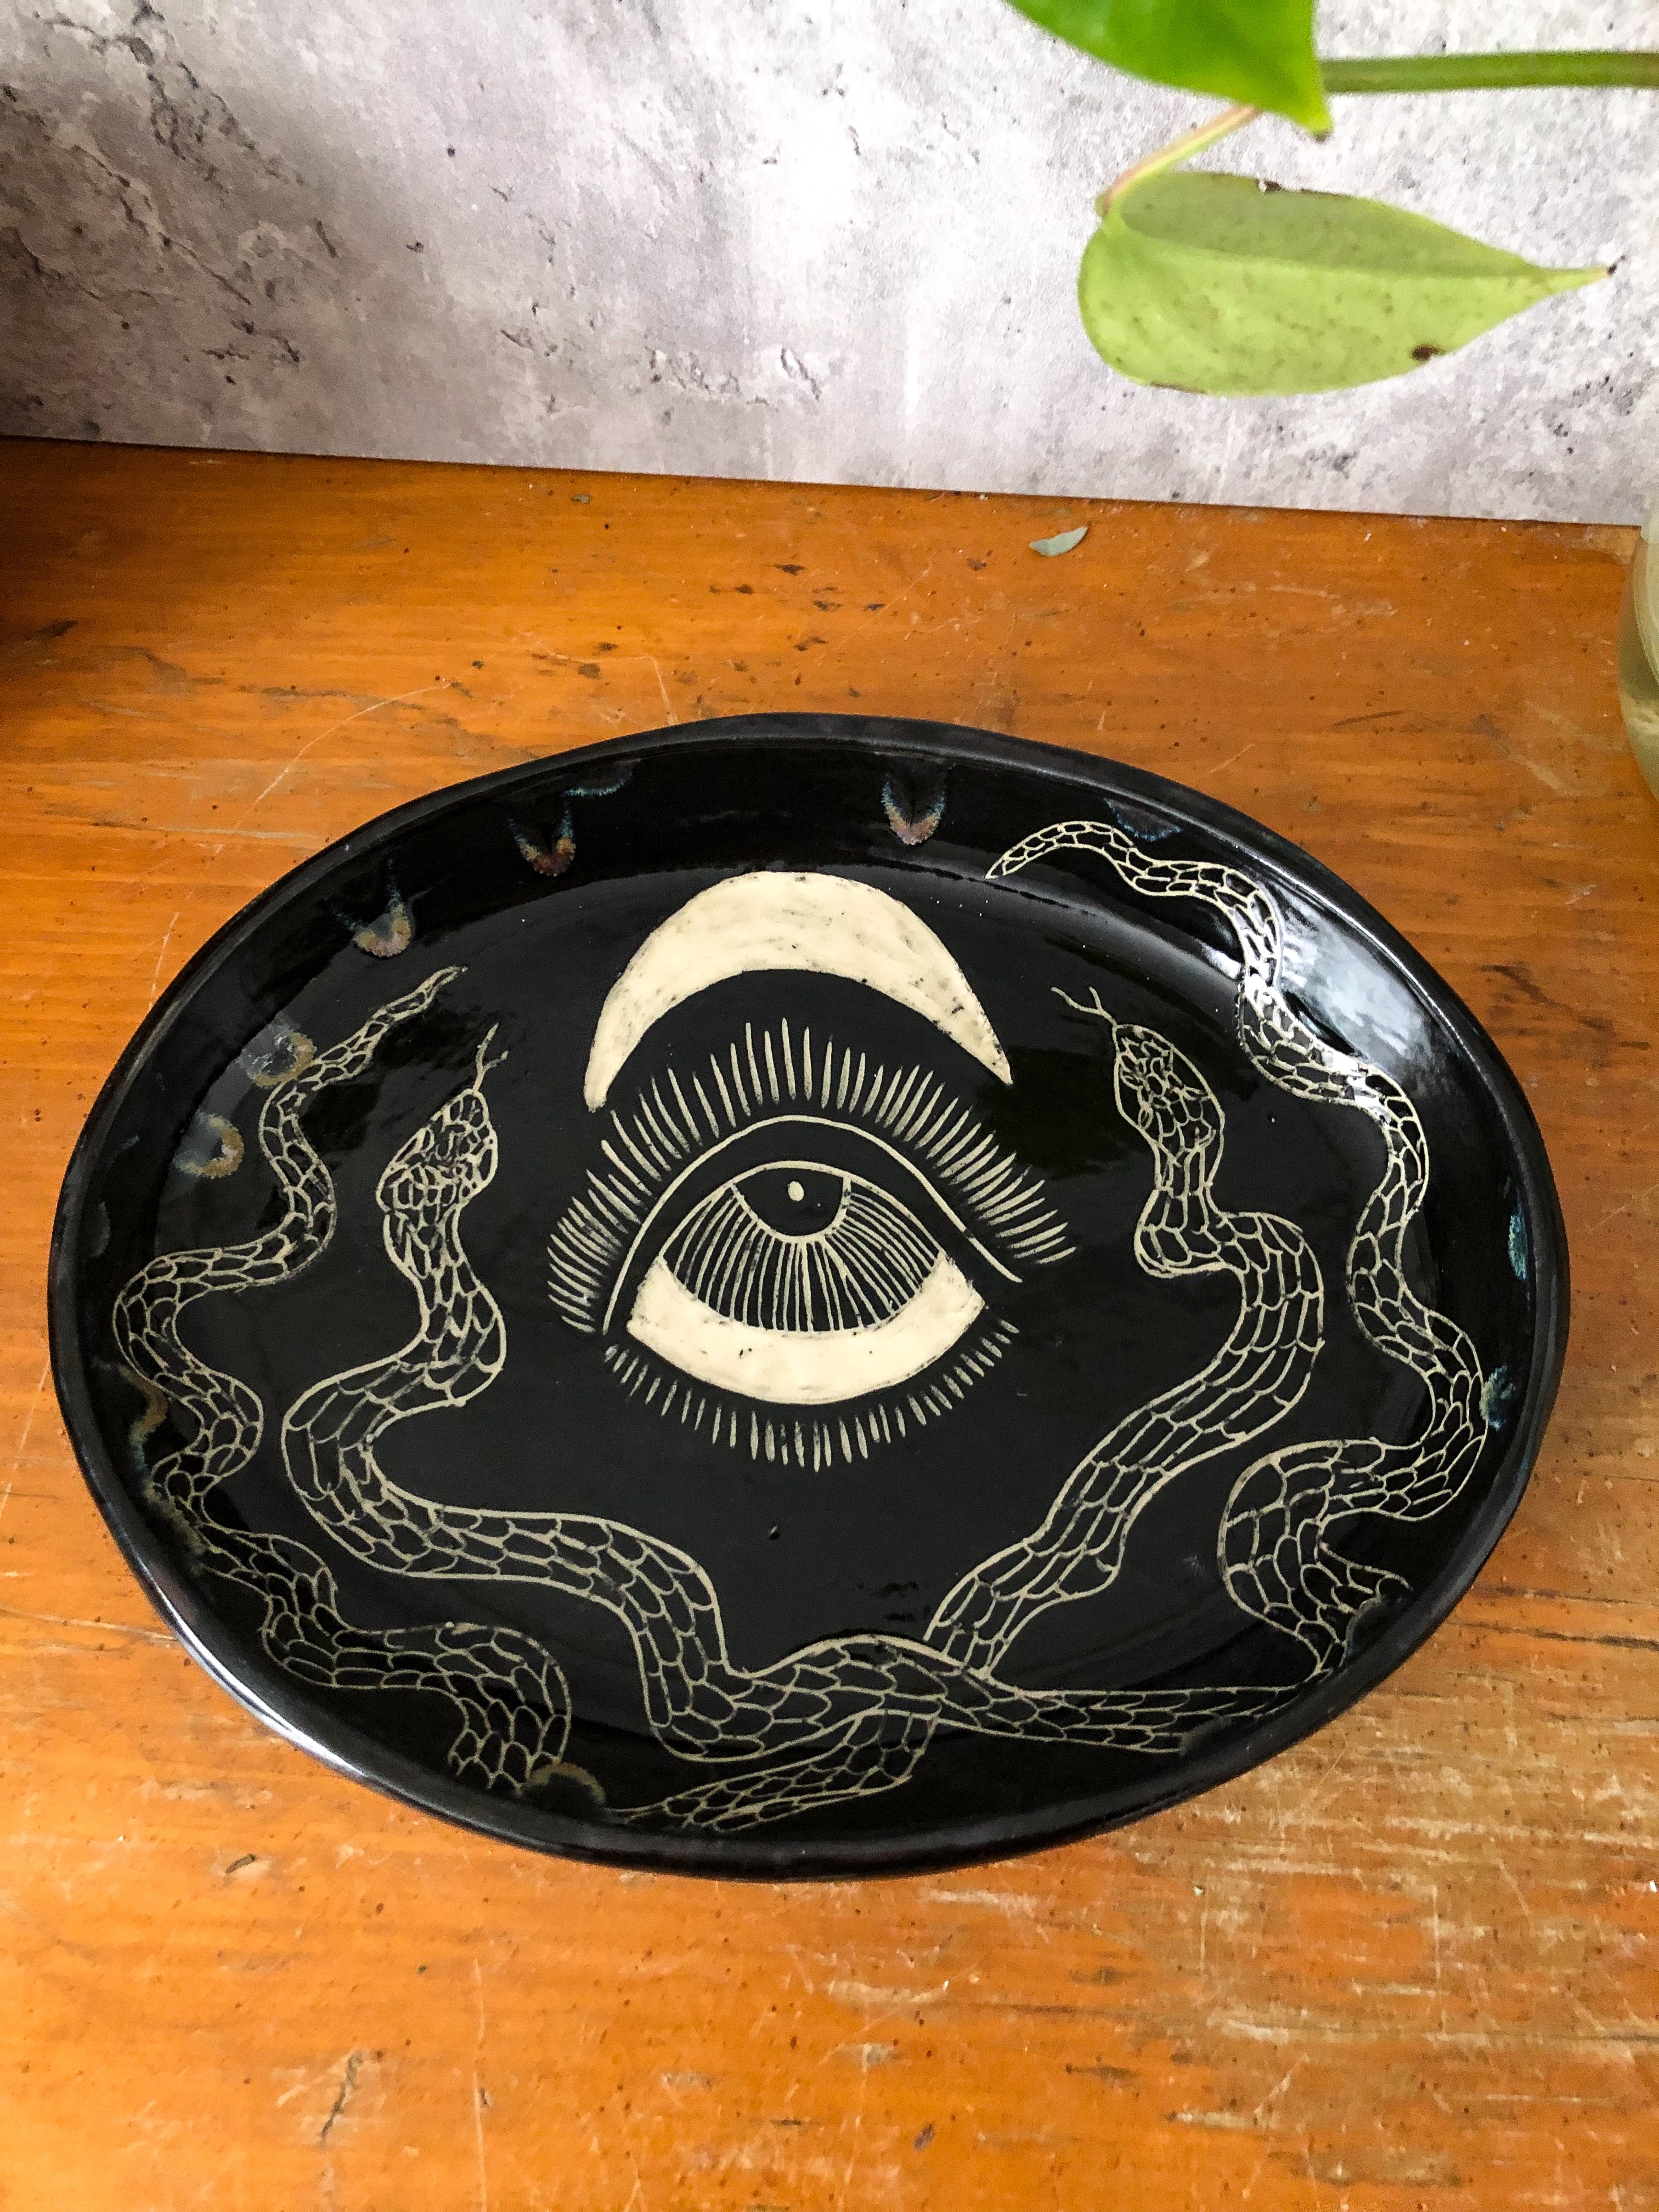 It's all about the details with this delightful serpent platter: two snakes sit opposite of each other framing out an eye underneath a crescent moon. Drippy oil-slick glaze oozes down from the rim. 